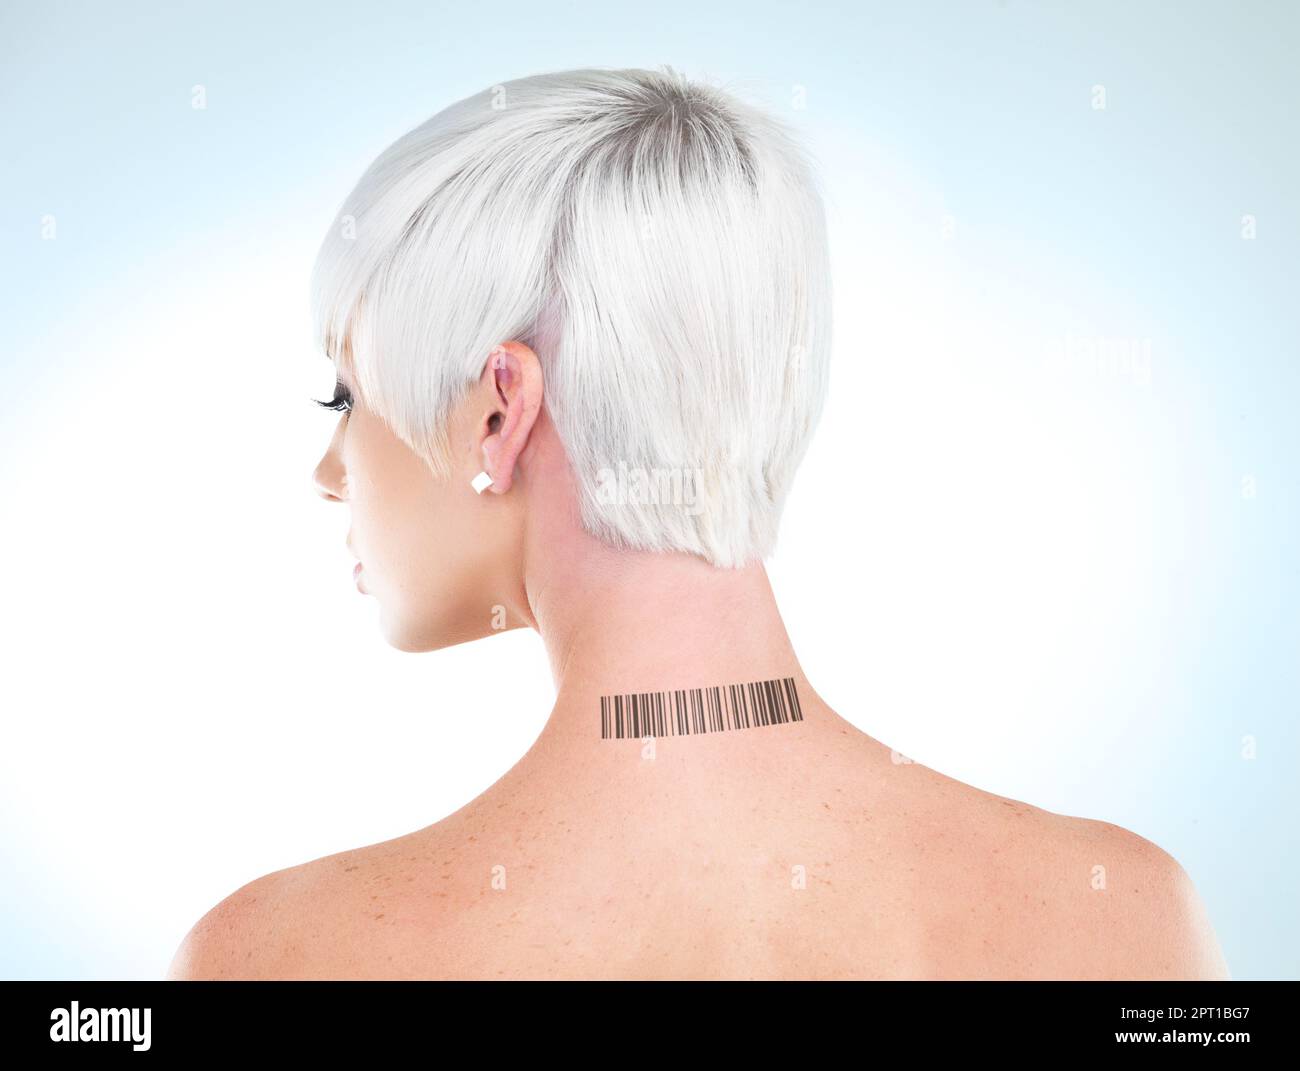 The Best List of Neck Tattoo Designs for Men In 2023 & Their Meaning